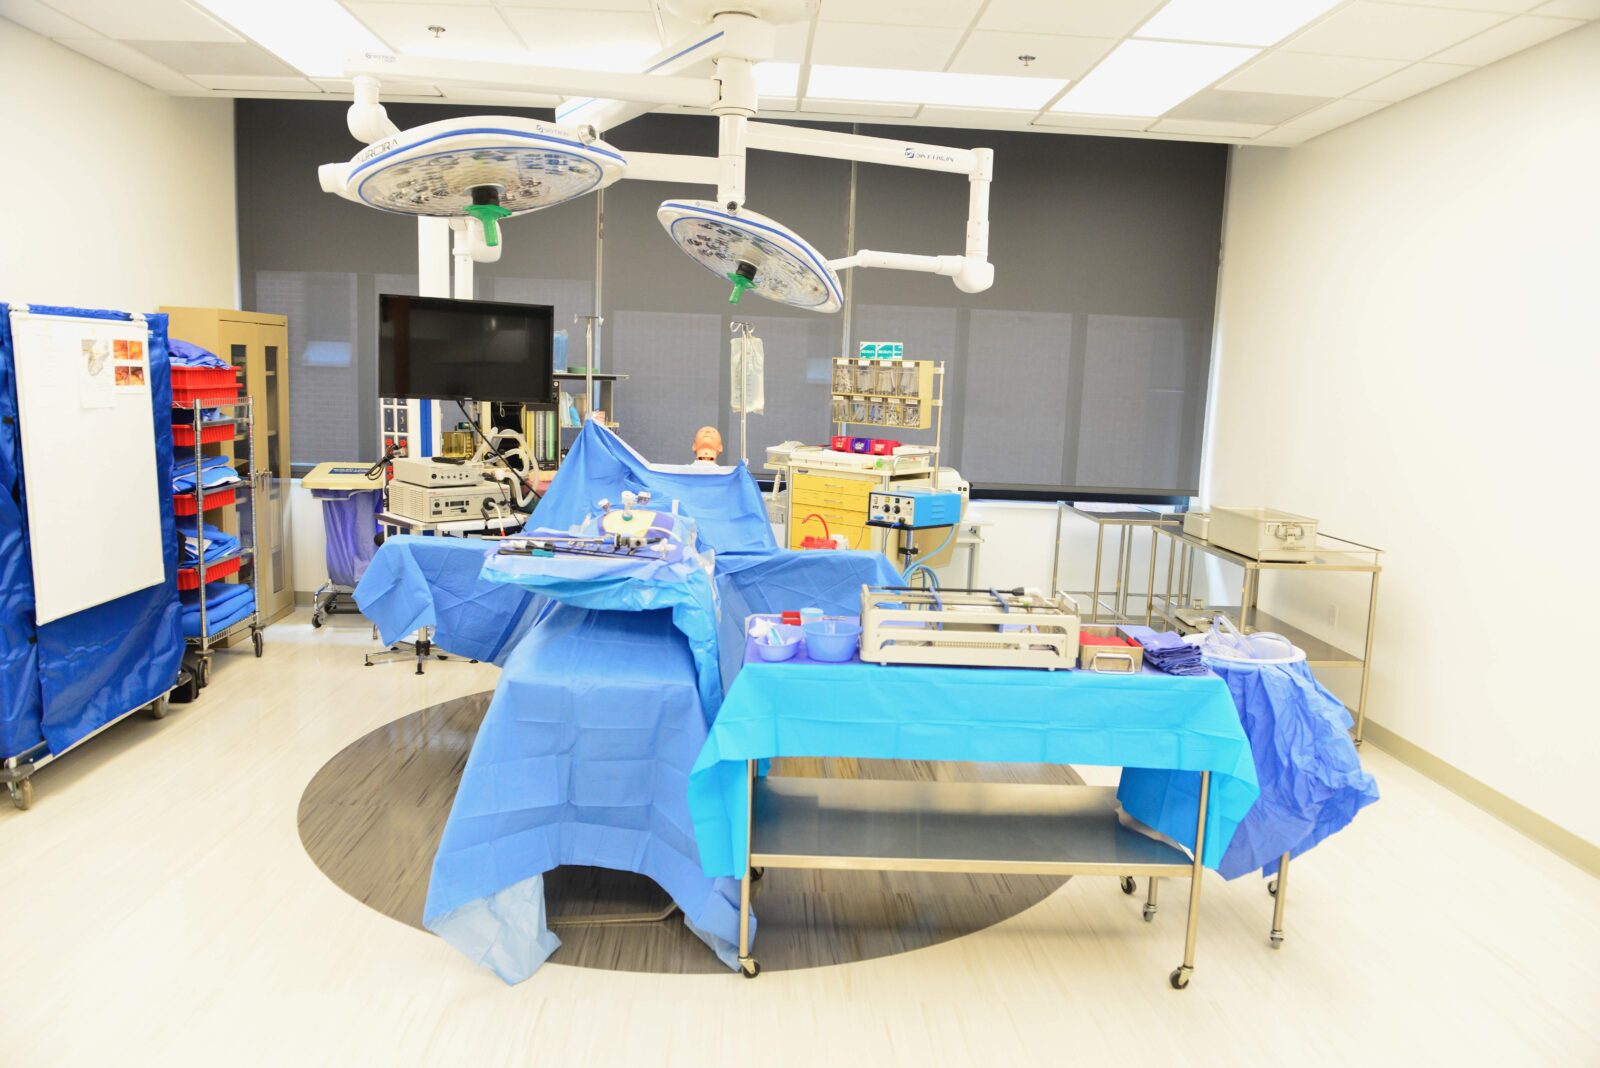 A STLCC new instructional surgical technology laboratory